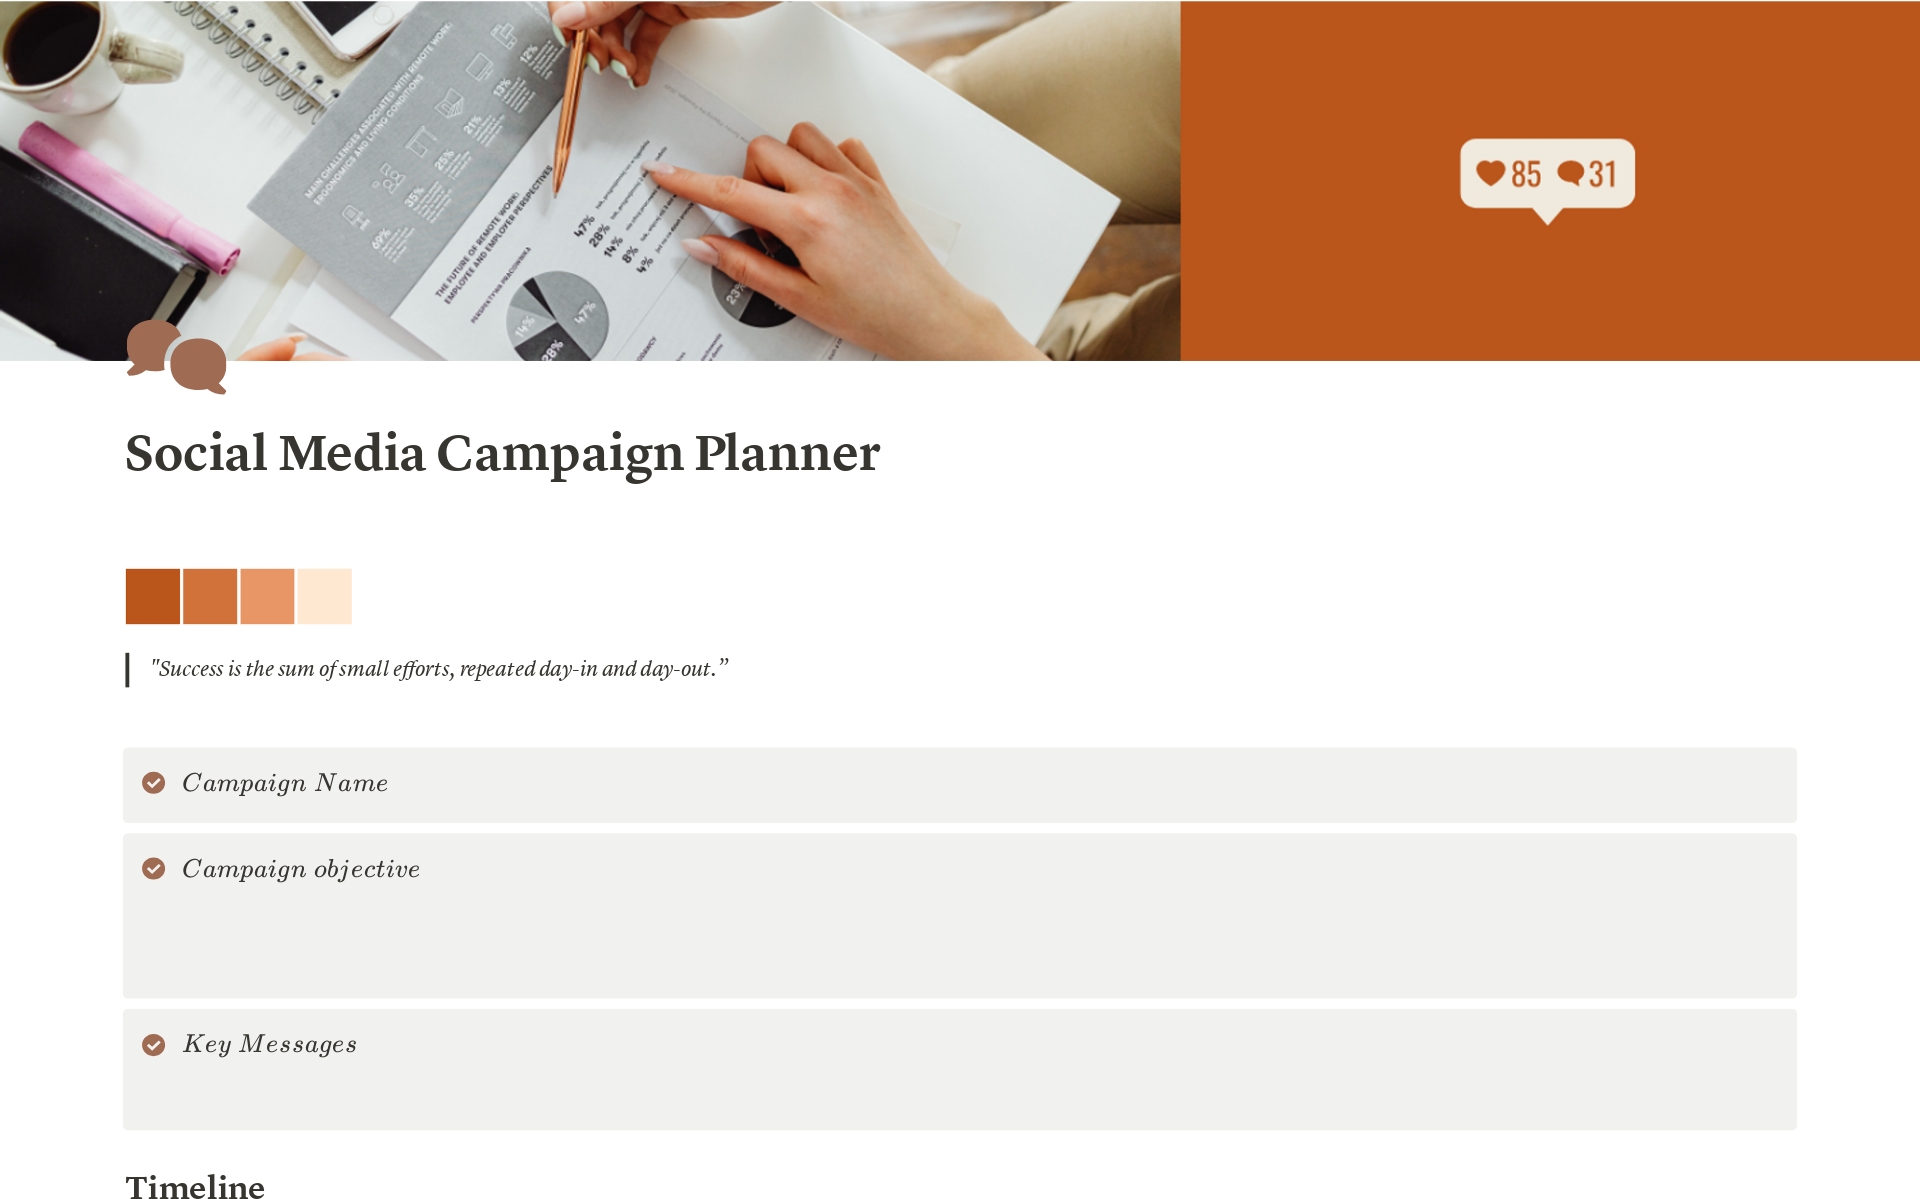 Manage your ads, content and brand narrative with this all-in-one social media Campaign Planner